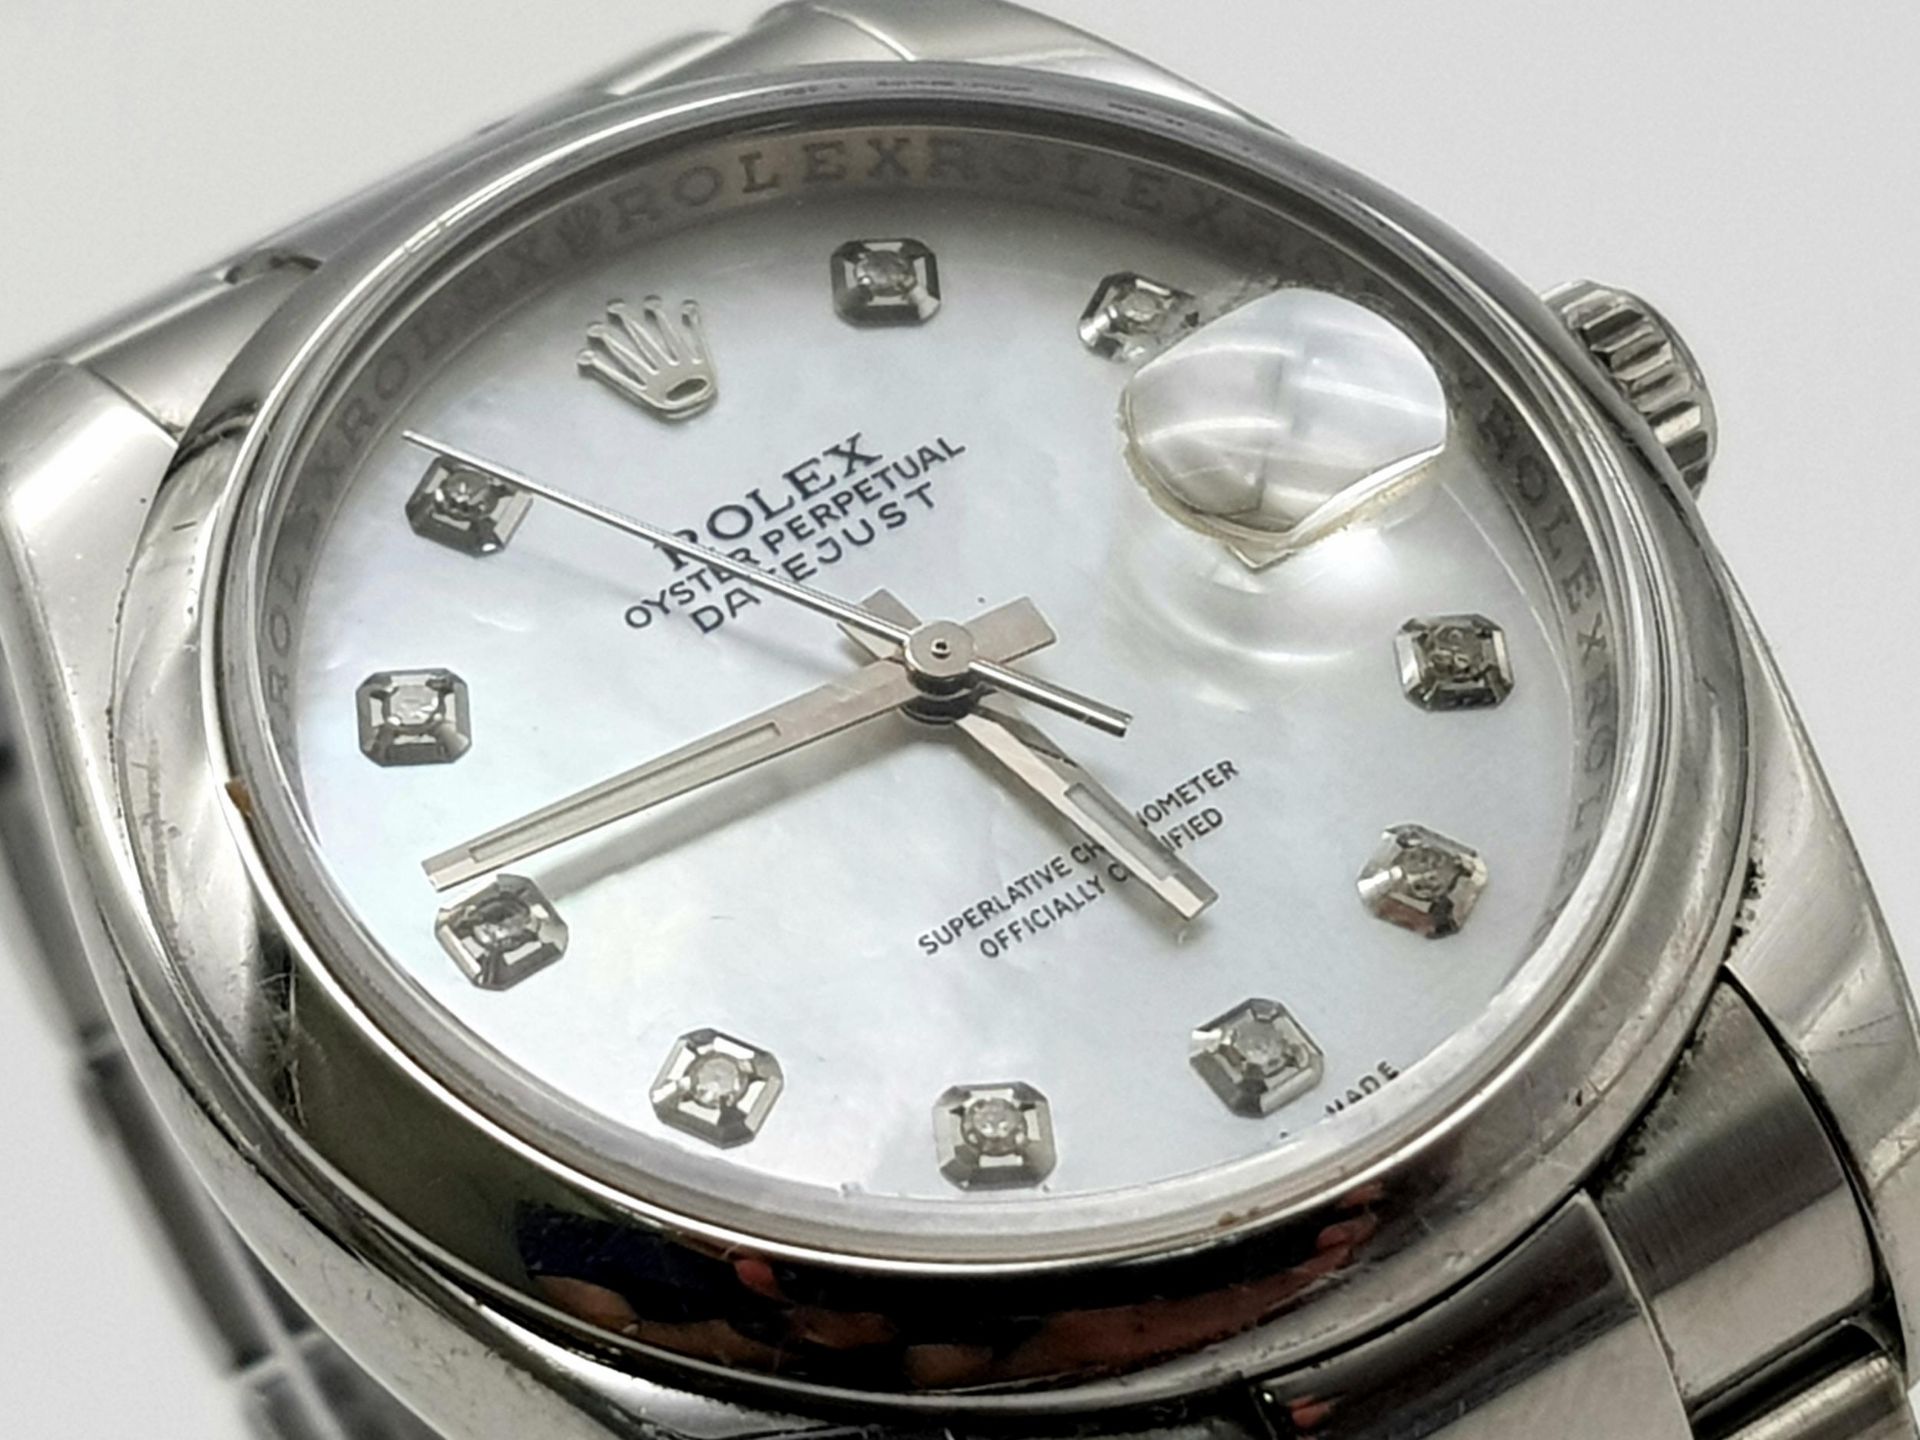 A Rolex Datejust Diamond Gents Automatic Watch. Stainless steel bracelet and case - 36mm. Mother - Image 3 of 7